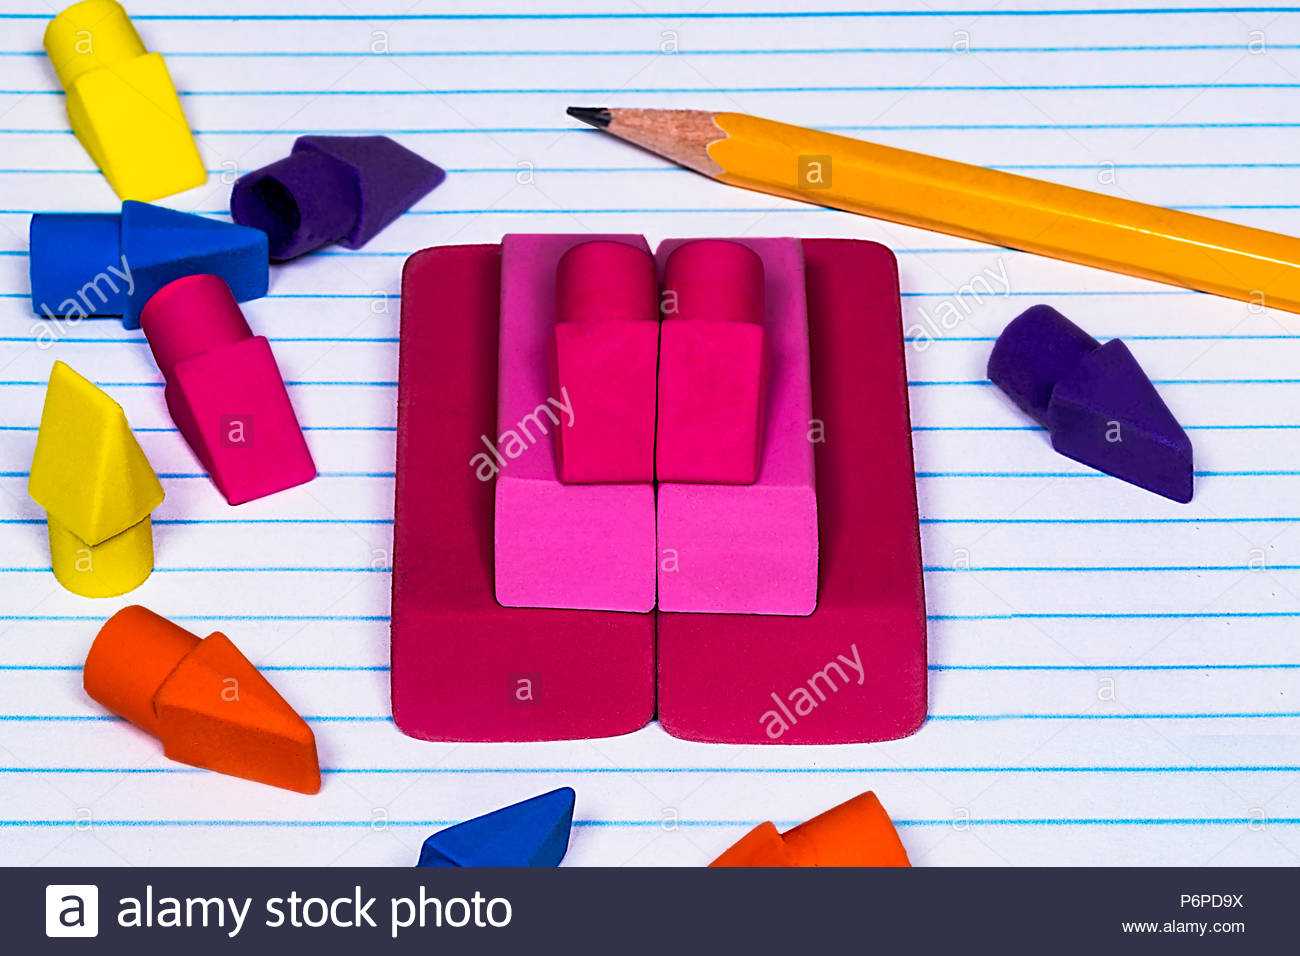 College Ruled Paper Stock Photos & College Ruled Paper Stock Pertaining To College Ruled Lined Paper Template Word 2007